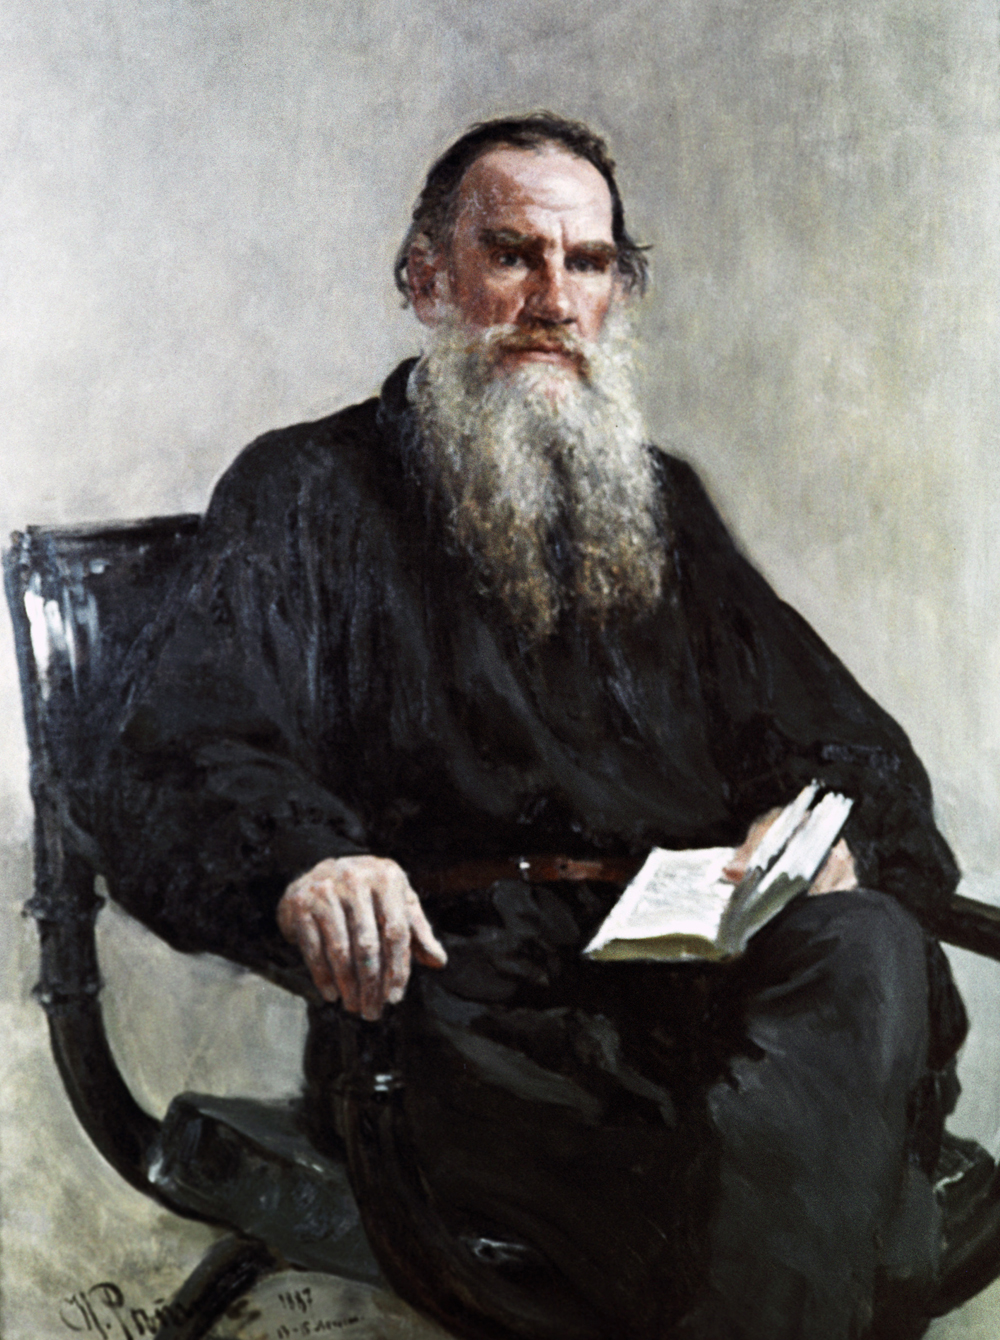 A copy of the portrait of Leo Tolstoy by Ilya Repin from the collection of the State Pushkin Fine Arts Museum.